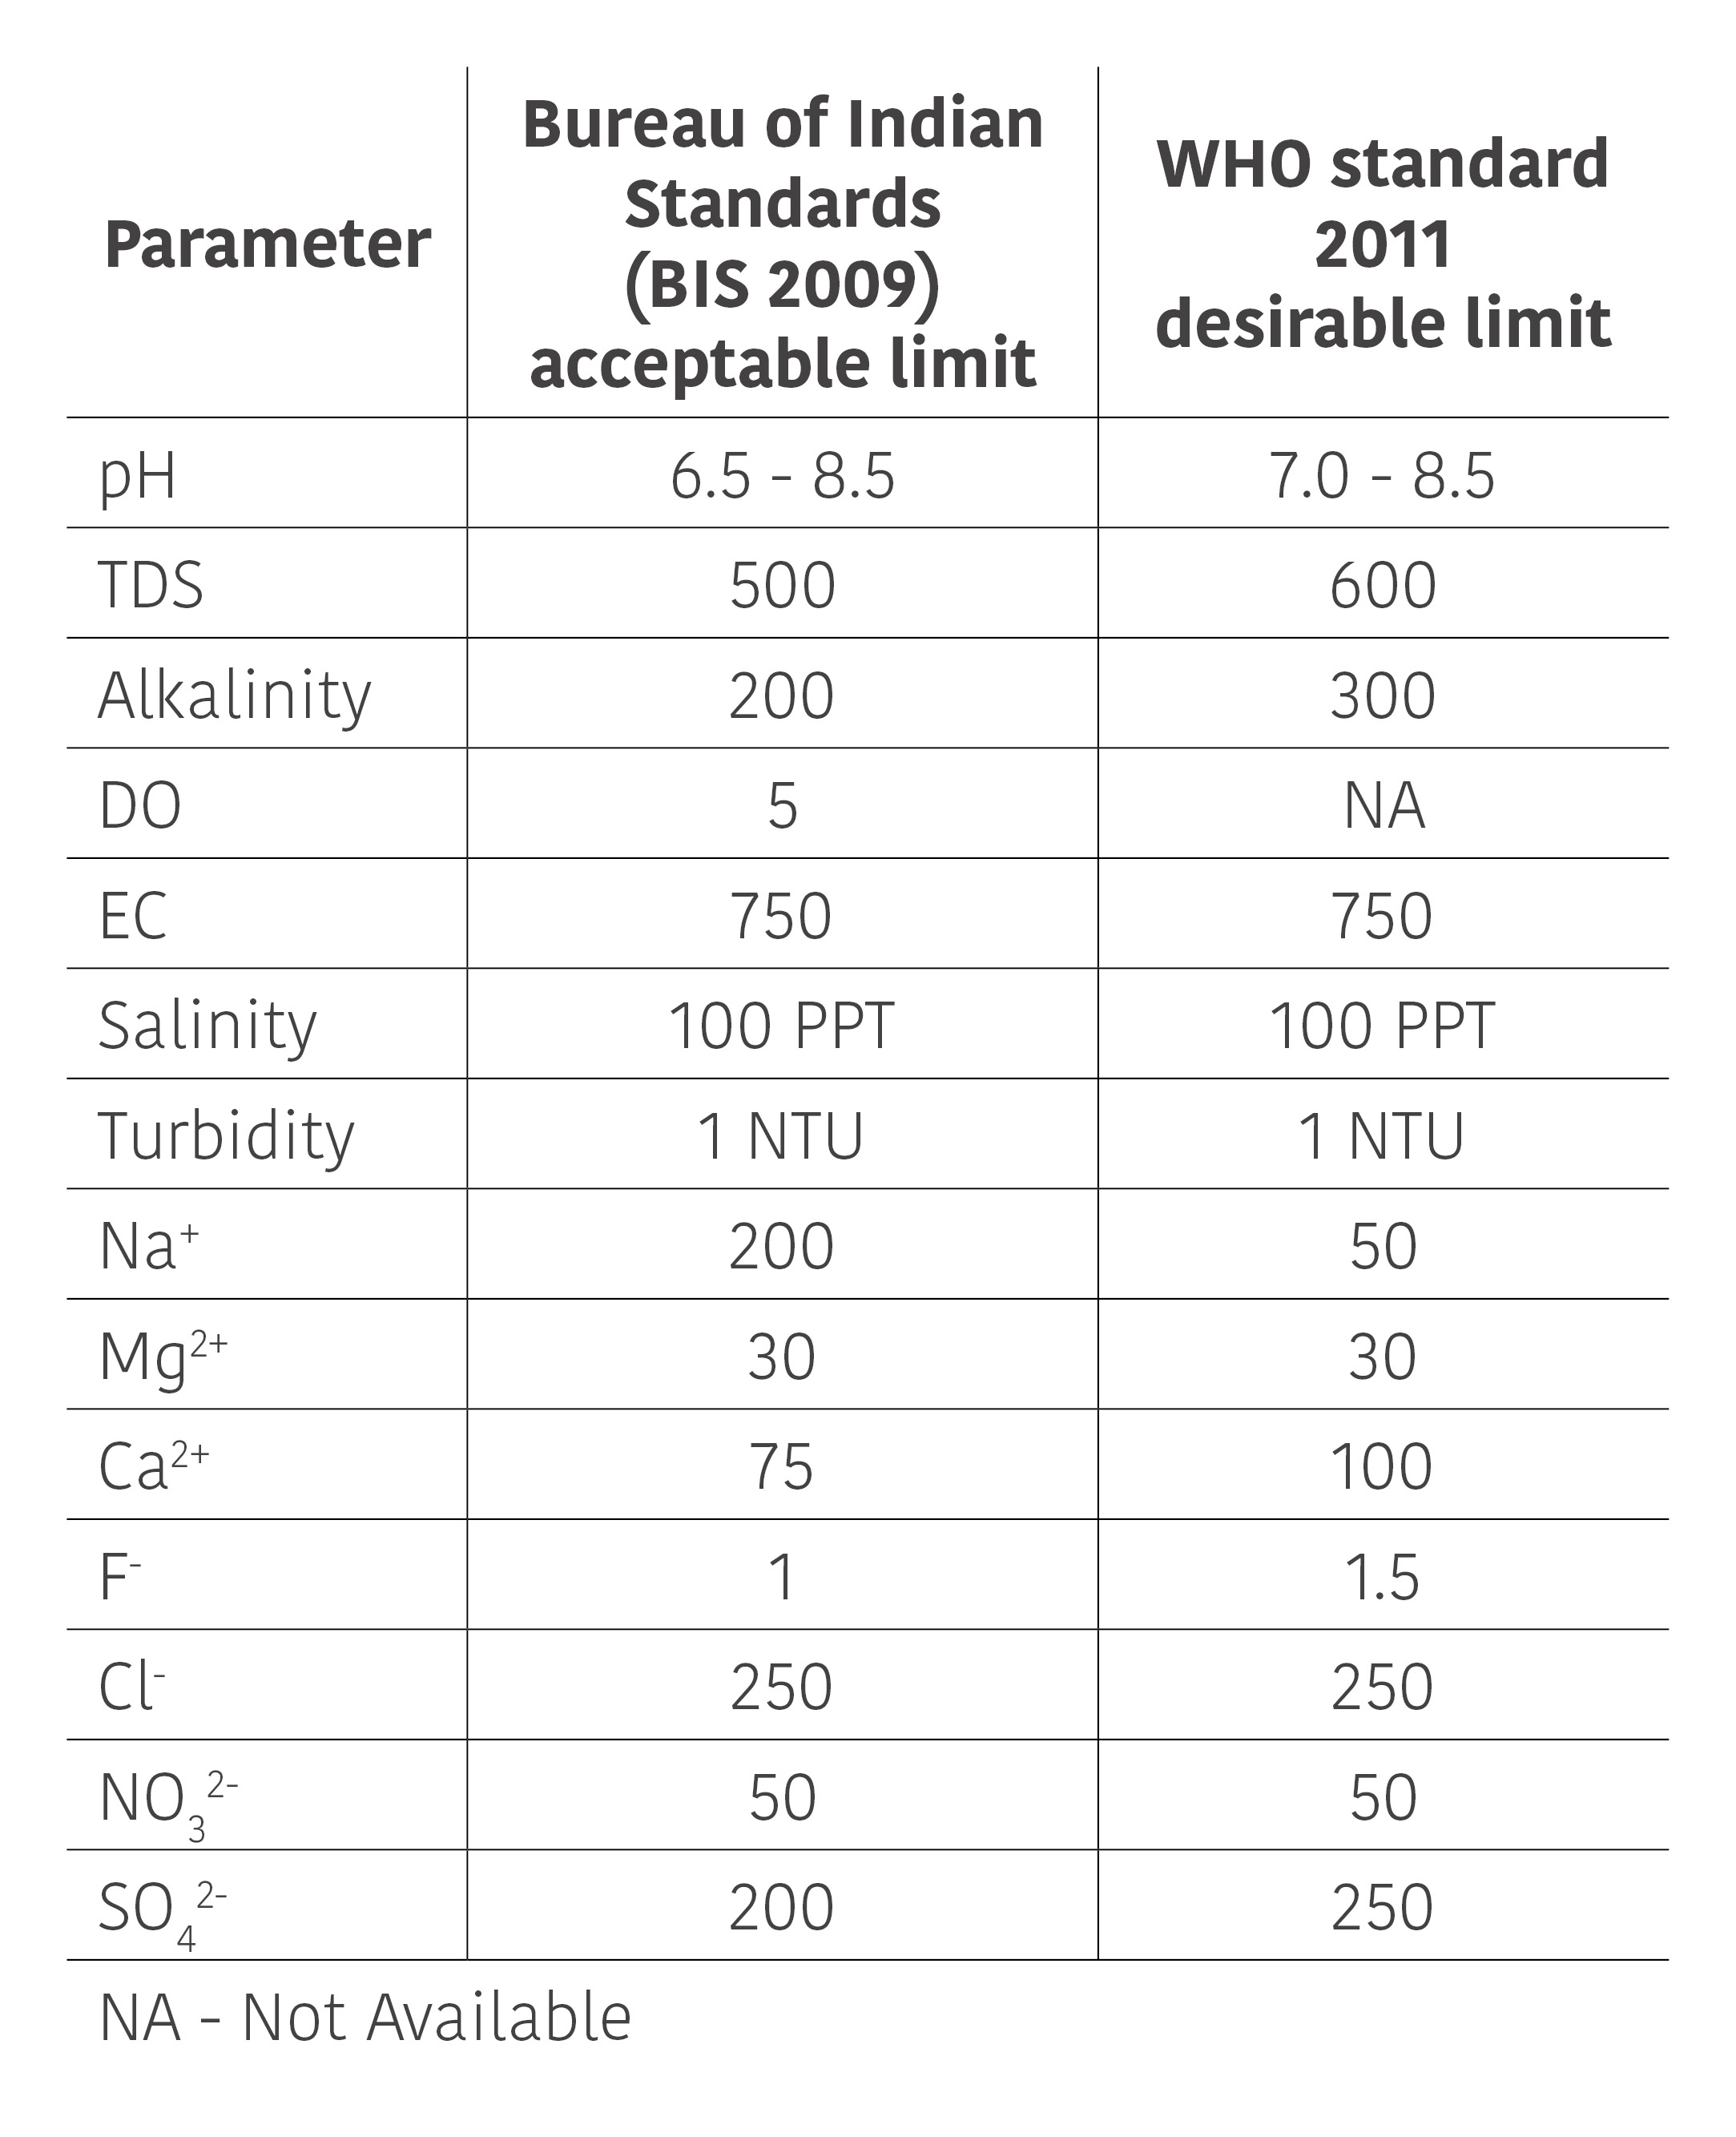 Table of BIS standards